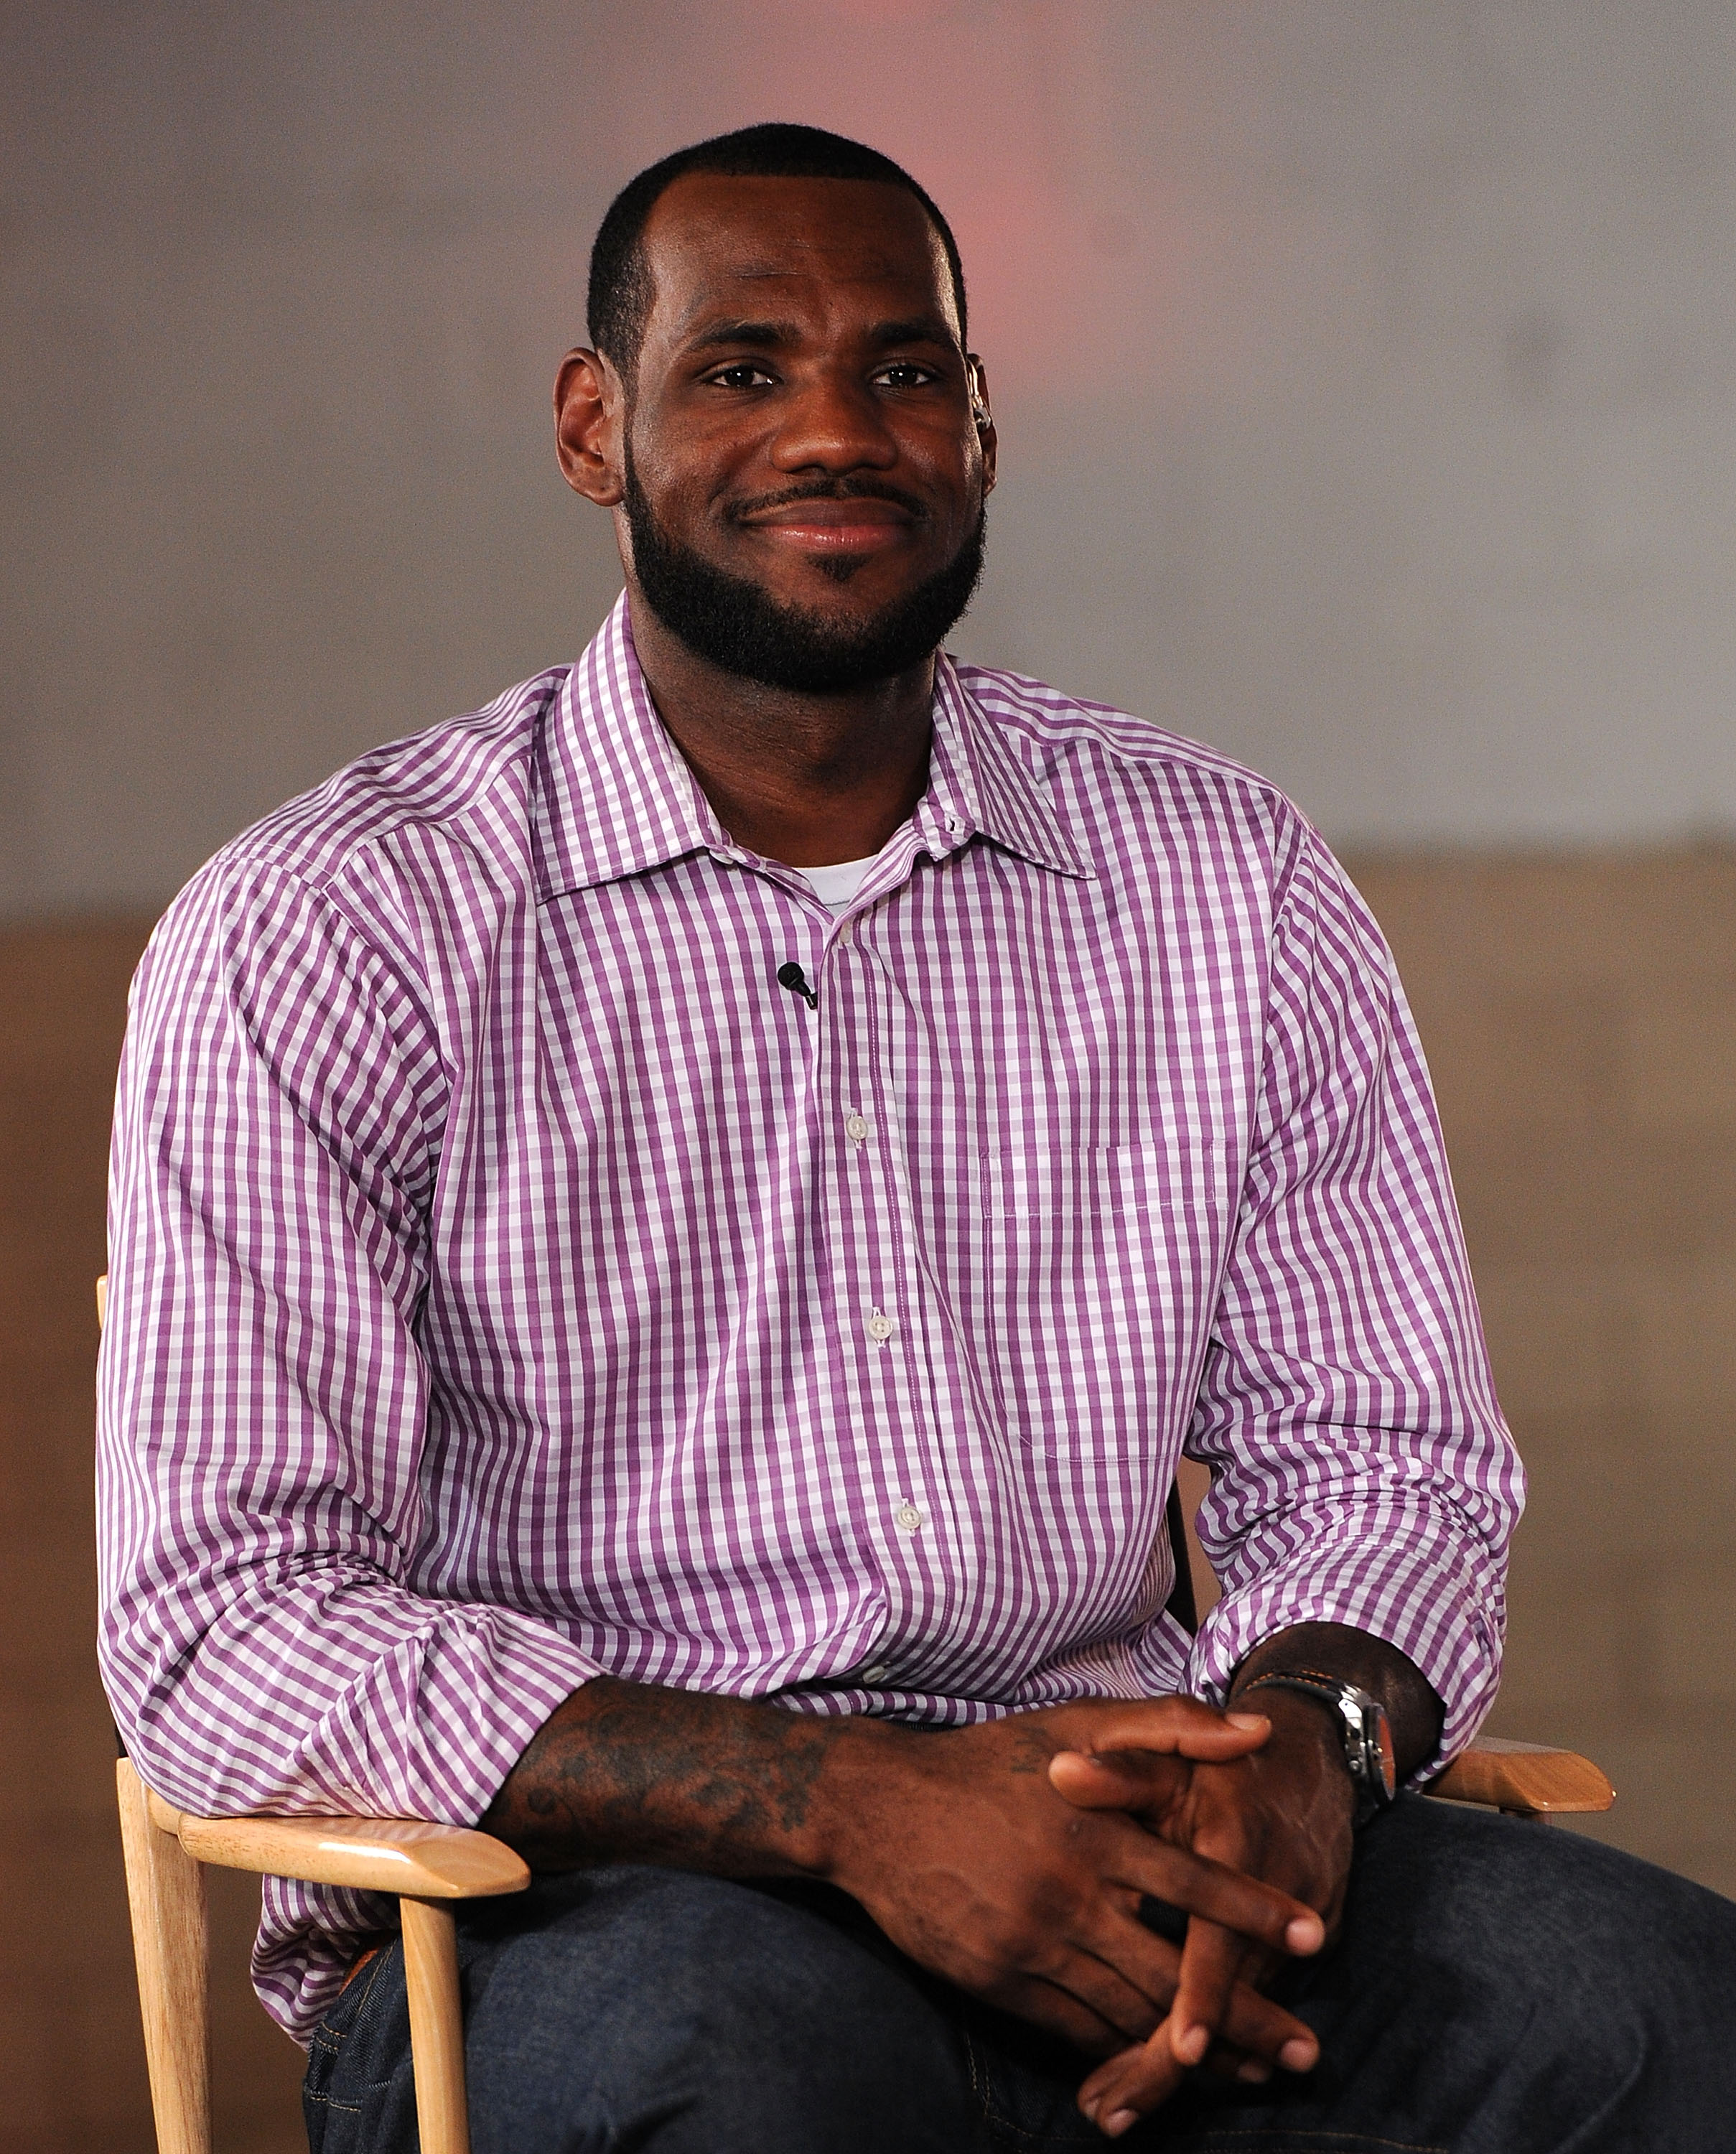 GREENWICH, CT - JULY 08:  LeBron James speaks at the LeBron James announcement of his future NBA plans at the Boys & Girls Club of America on July 8, 2010 in Greenwich, Connecticut. James announced during a live broadcast on ESPN that he will play for the